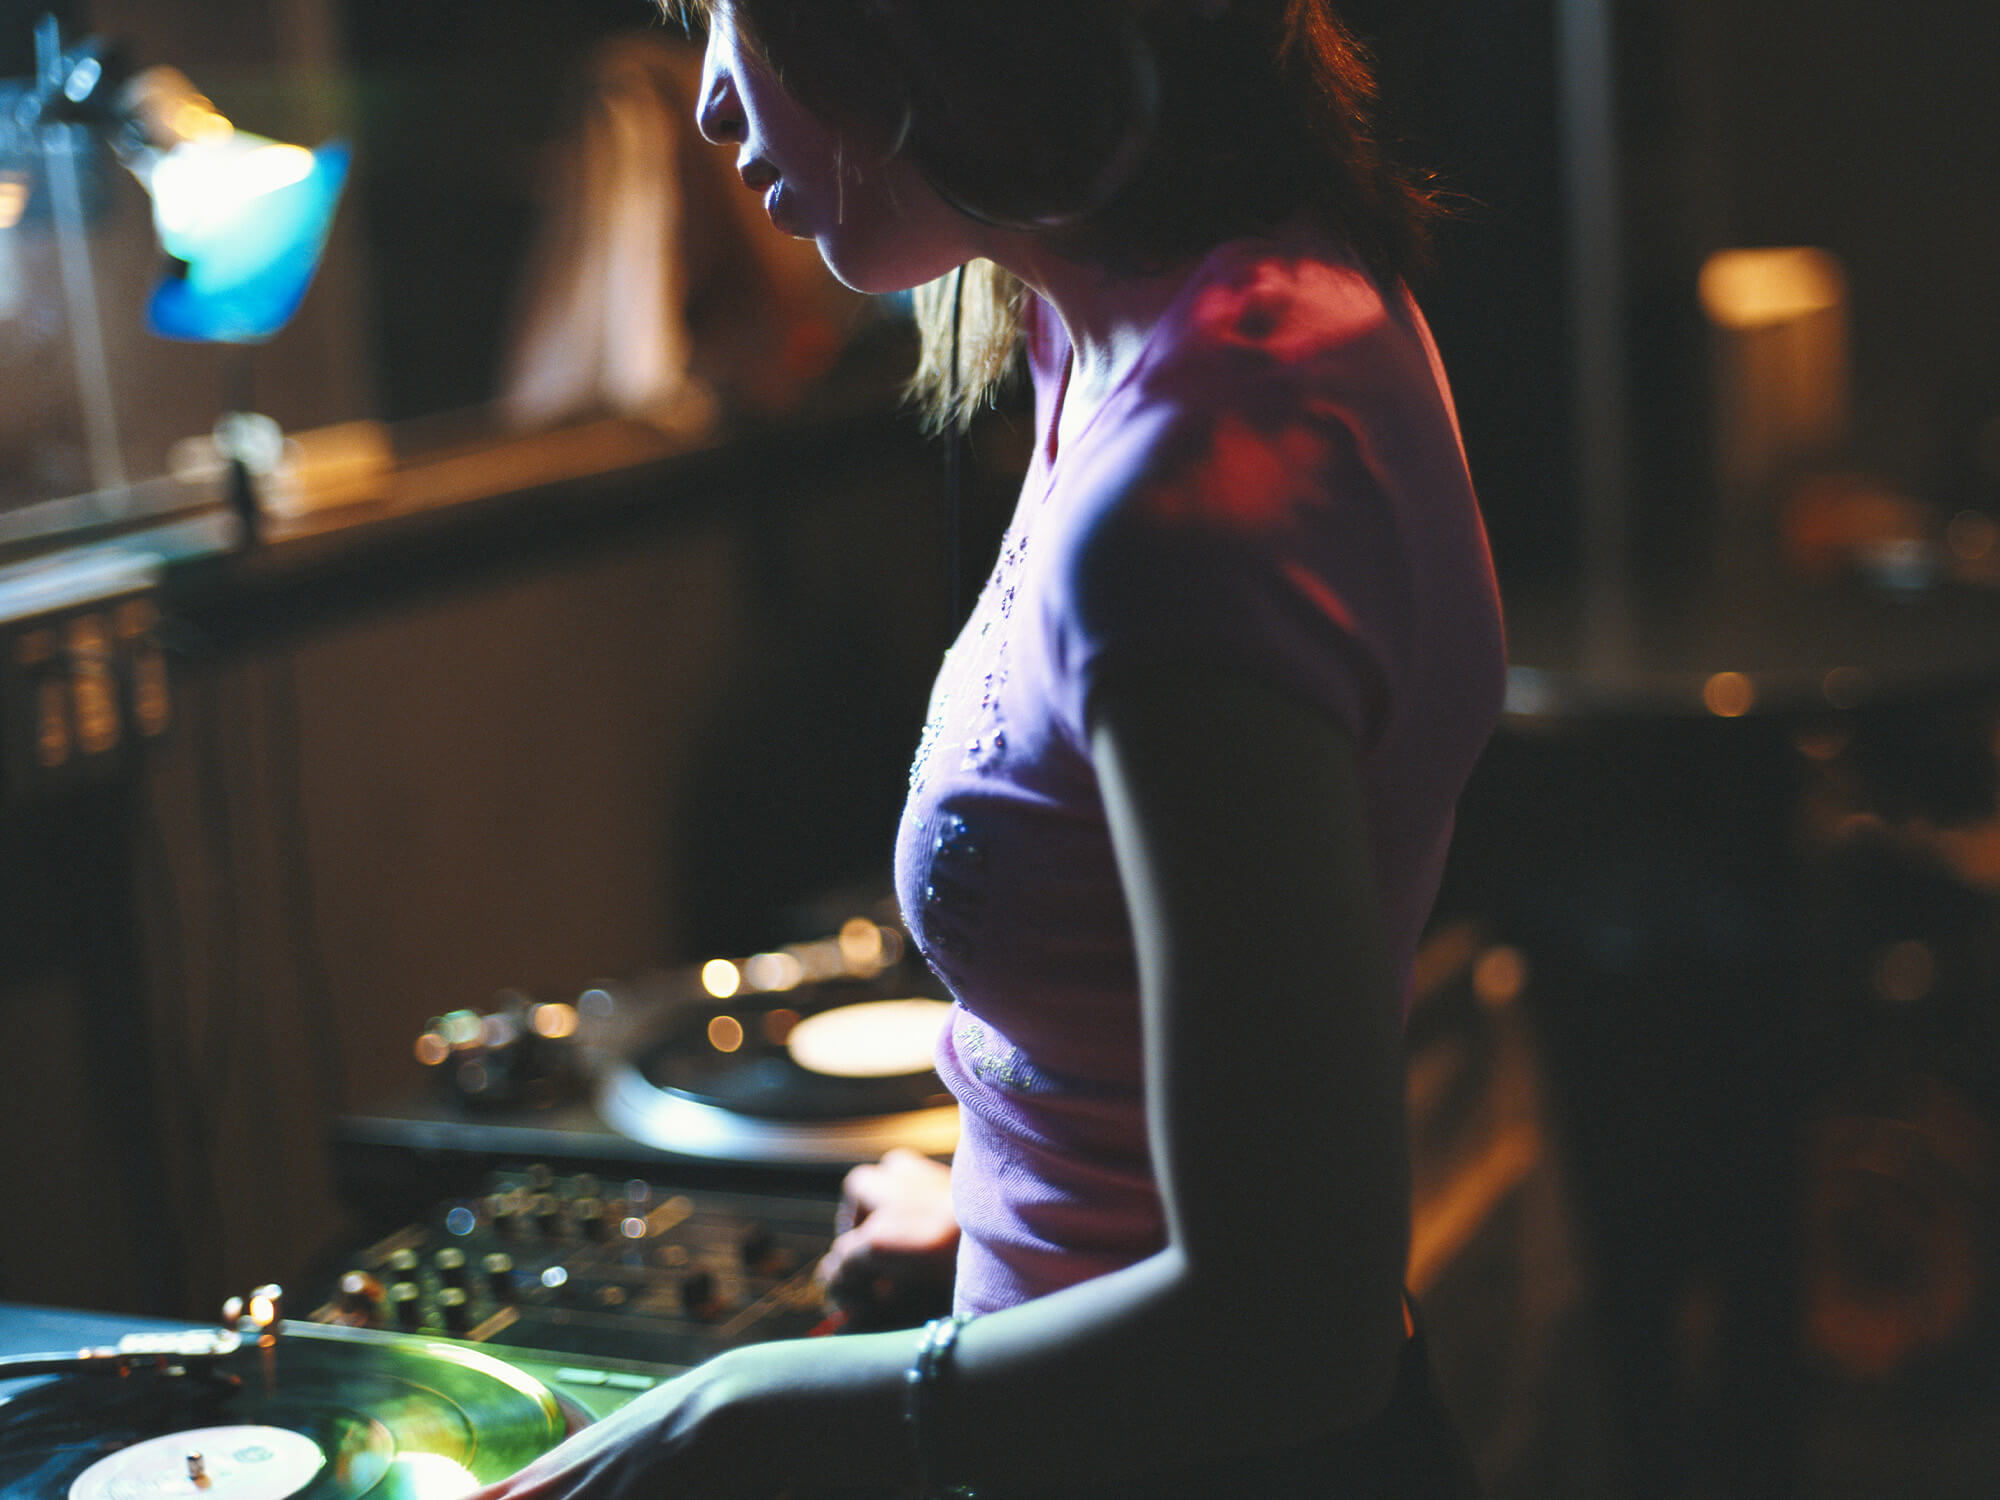 Side profile of a young woman behind DJ decks wearing headphones